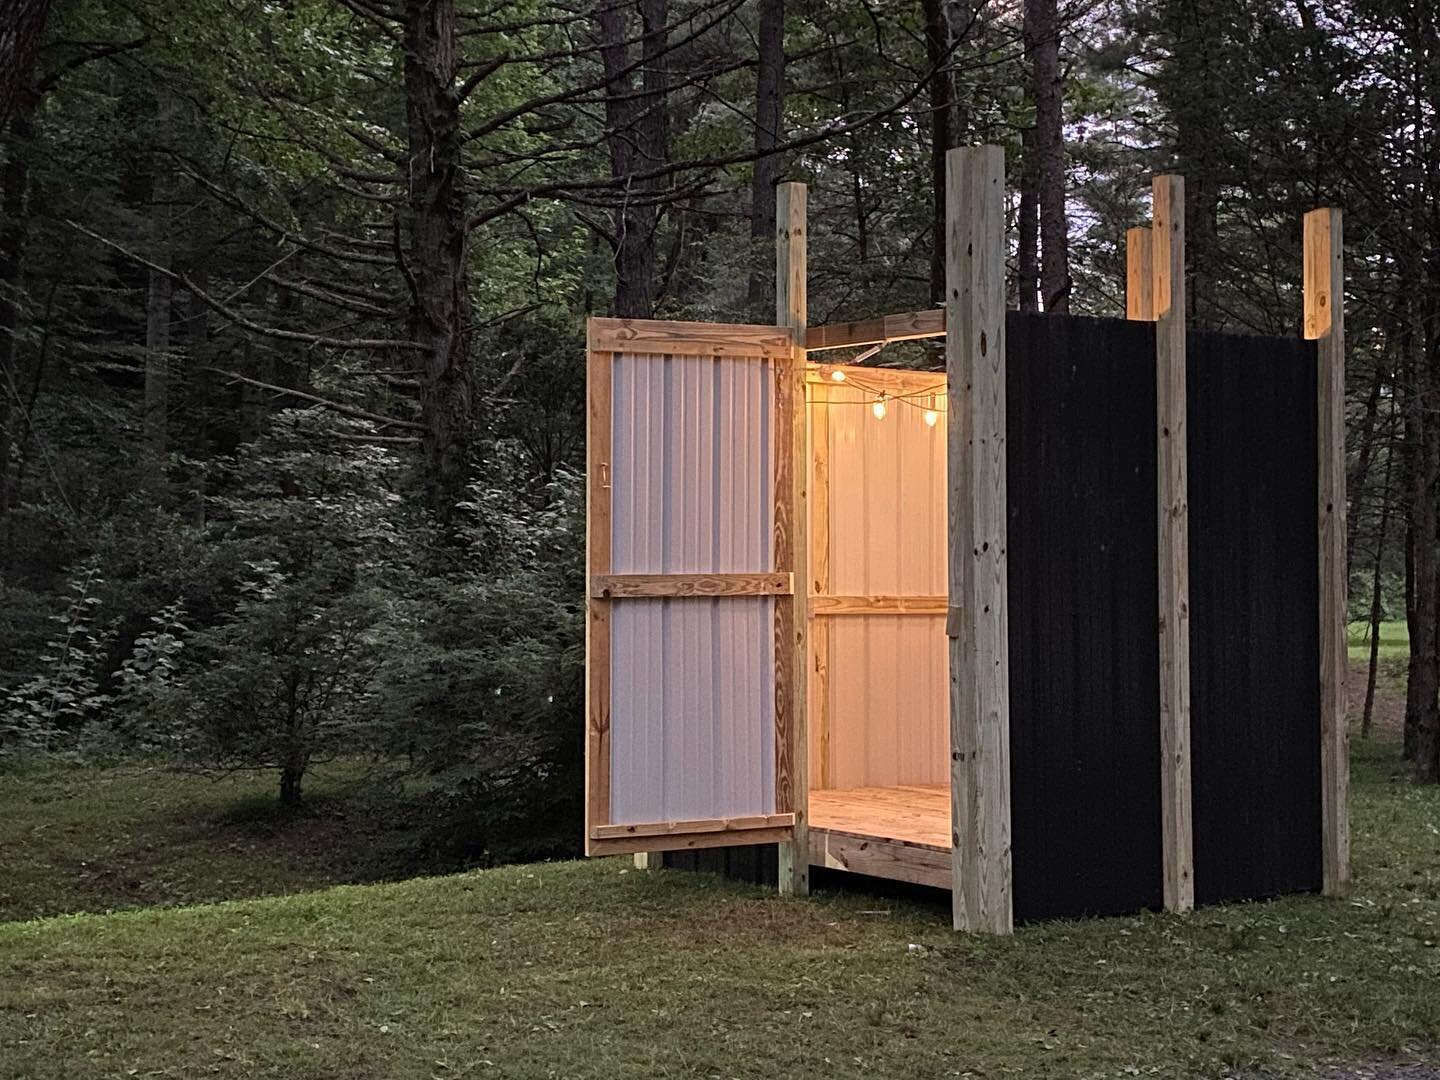 The Payne Cabin shower was completed tonight, just in time for the solar lights to come on! 😍

Going topless for the summer, roof to be added Autumn 2020!

#beoutdoors @campbearwallow 
#disandreconnect #outdoorshower
Gorgeous work guys!  @dryrivertr